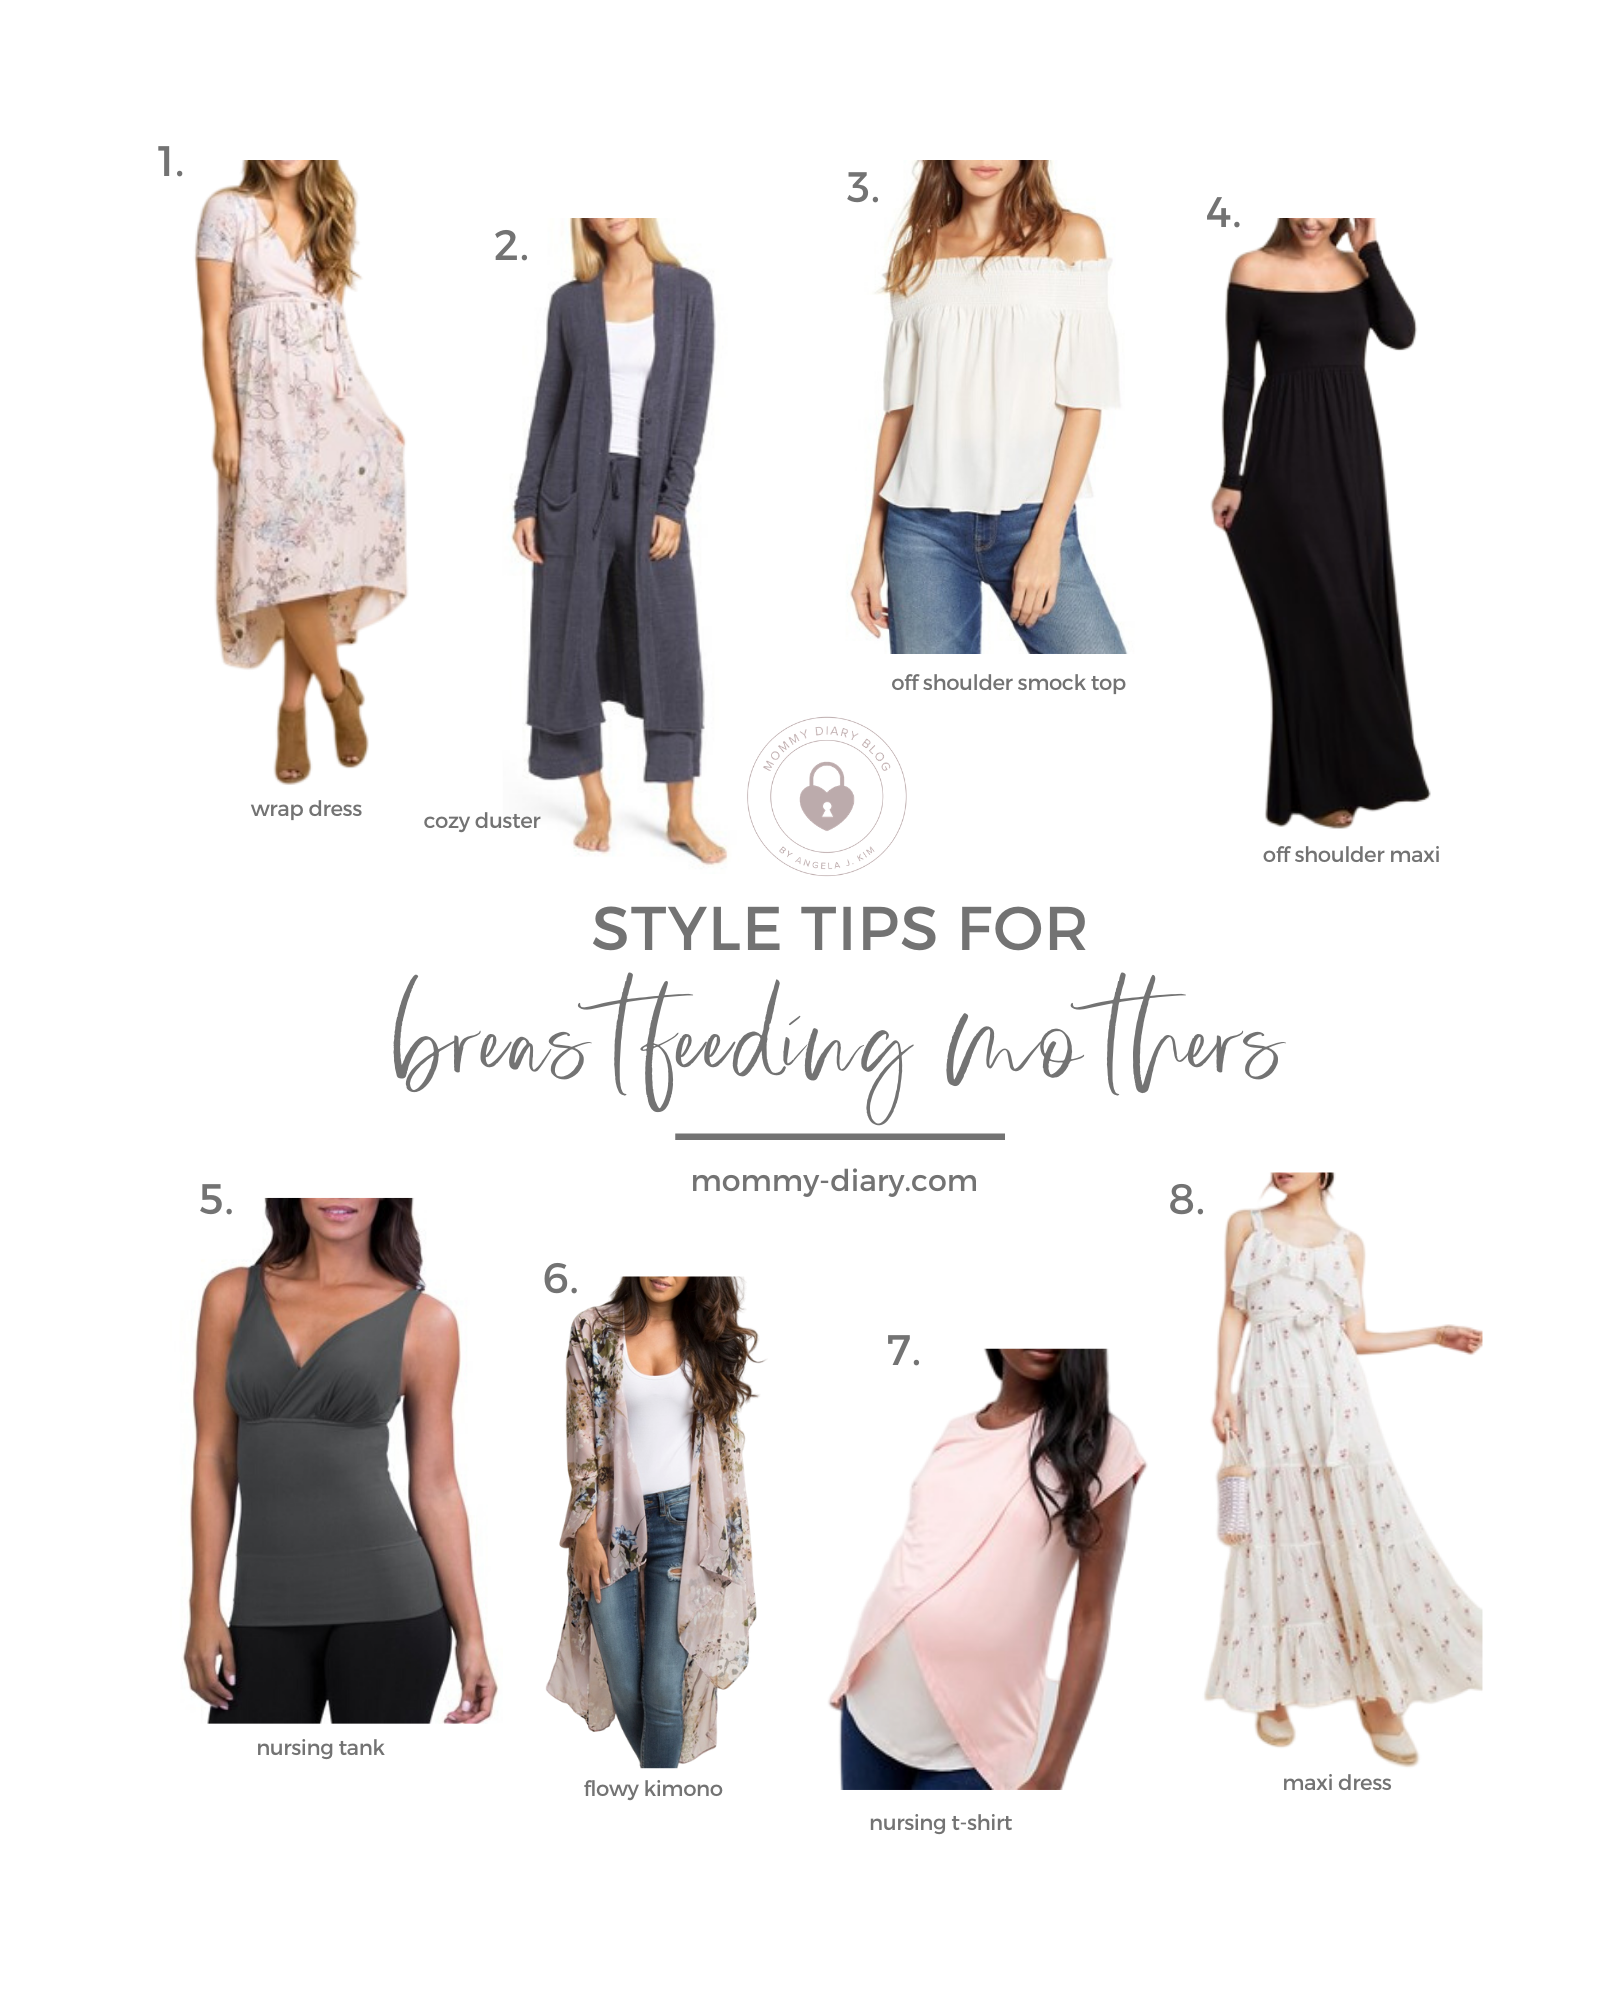 Nipple Covers for Dresses: A Guide to Dressing for Summer Weddings